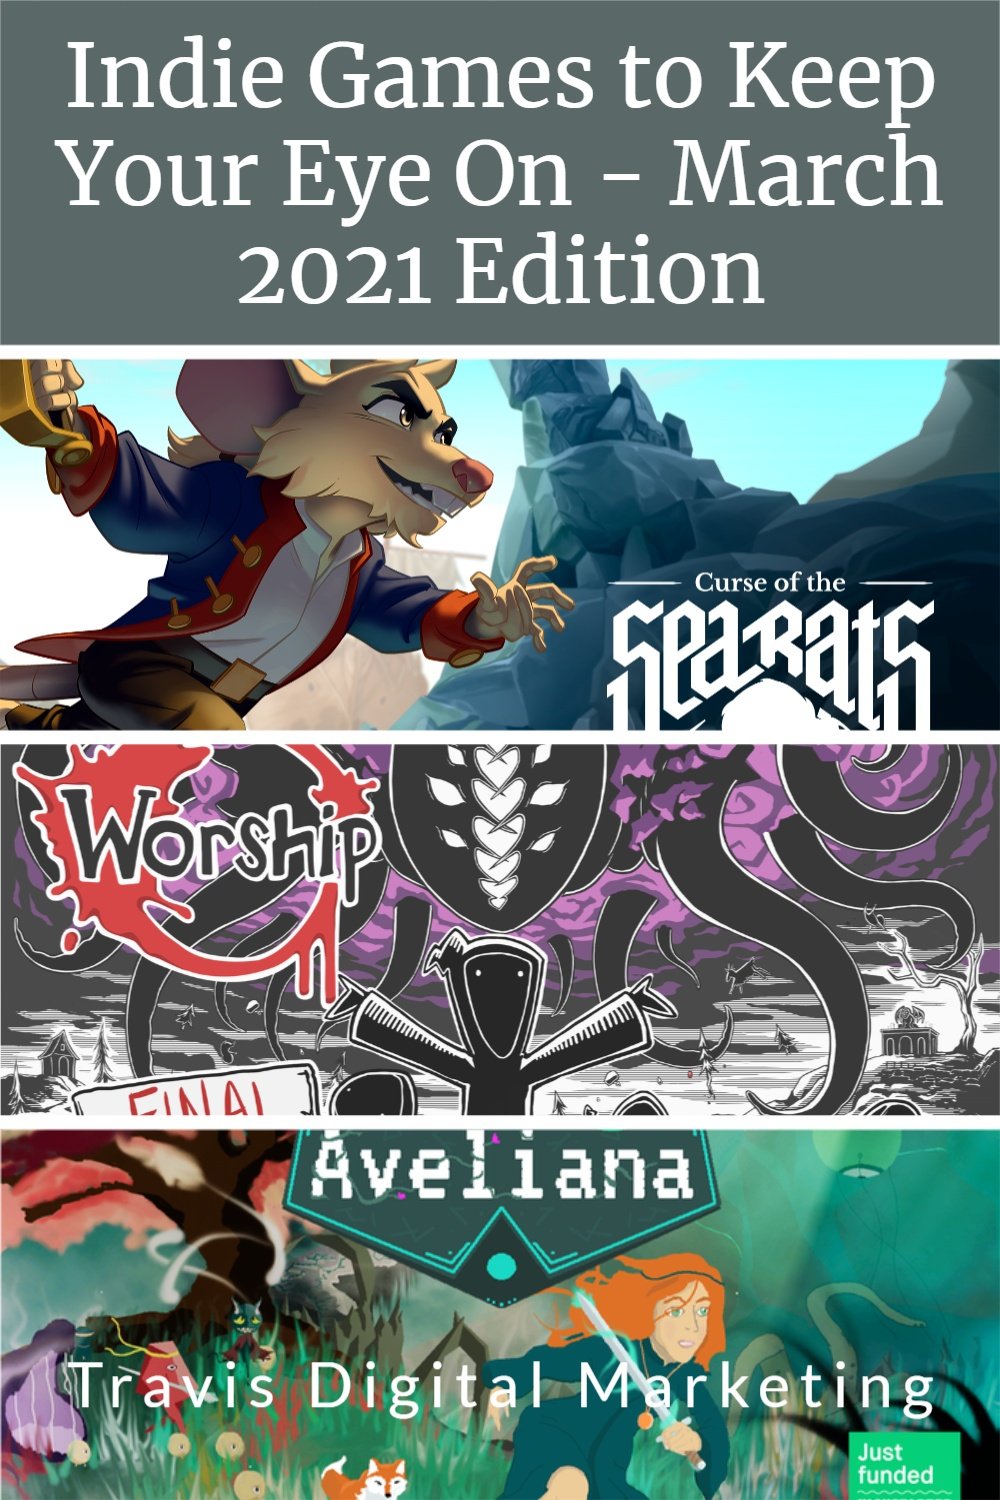 Indie games to keep an eye on, featuring curse of the sea rats, aveliana, and worship